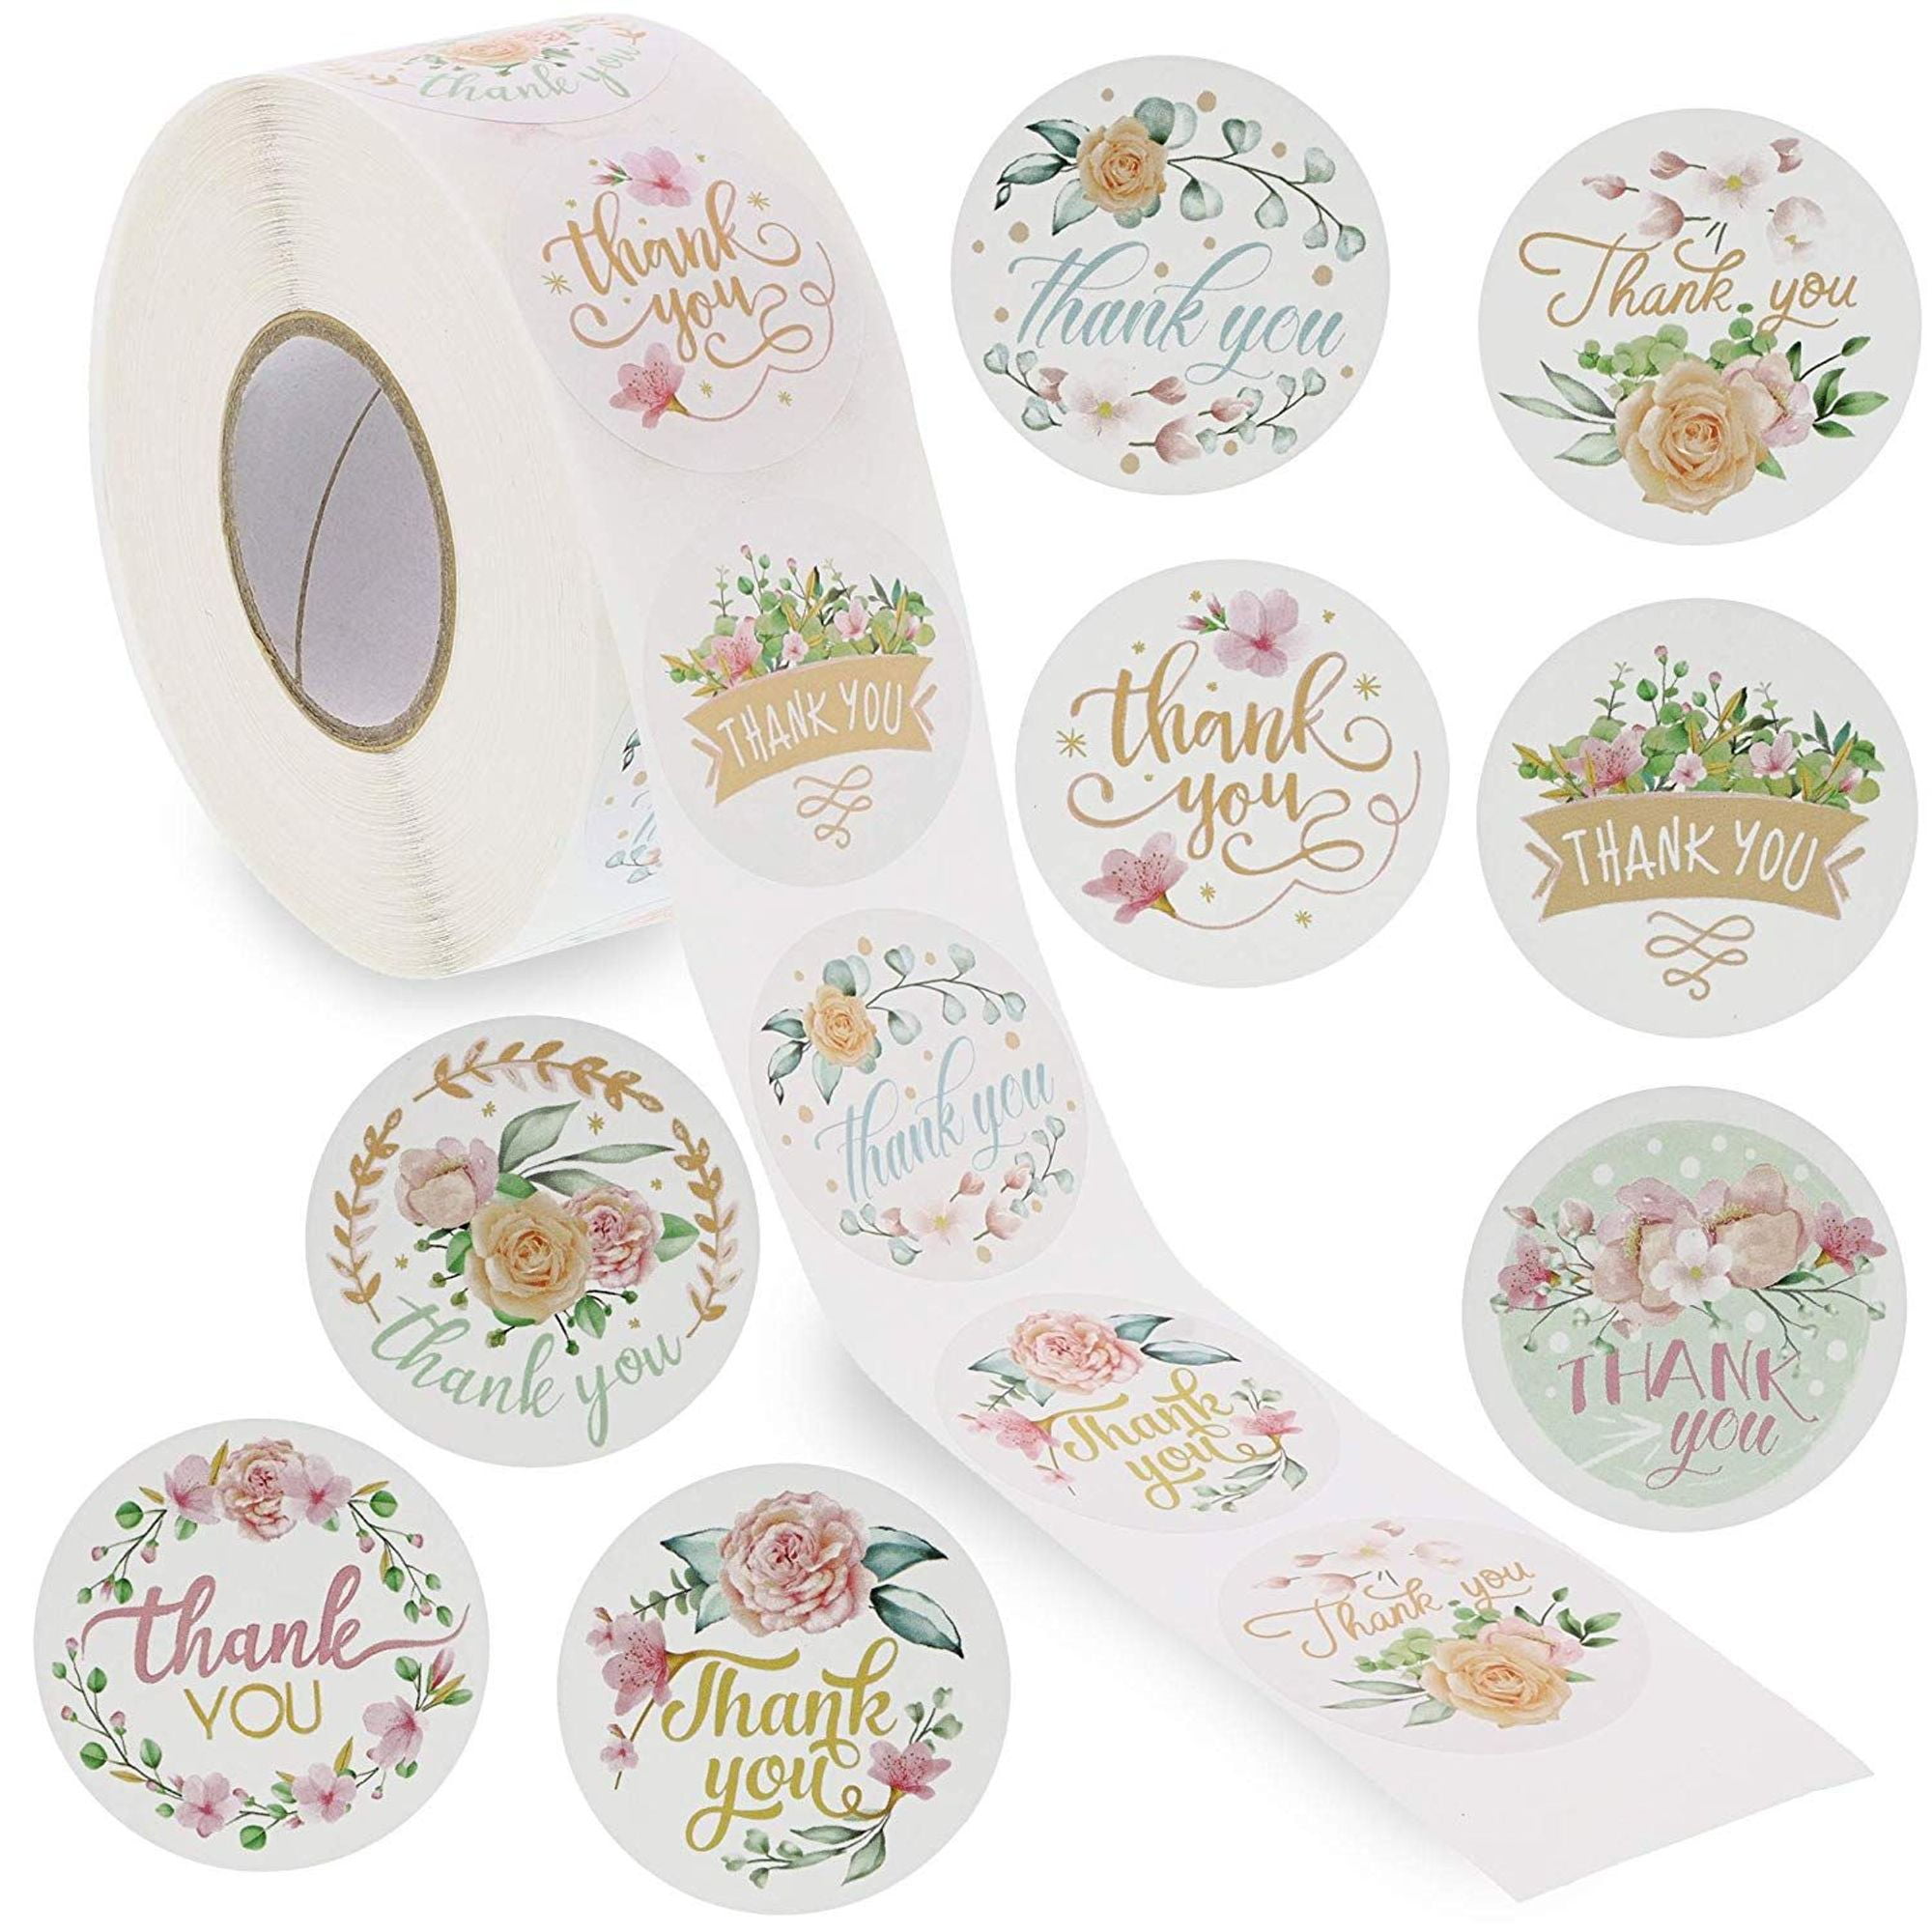 Party Favour Baby Shower Custom Round Stickers for Small Businesses Bridal Shower Stickers Wedding Favour Stickers